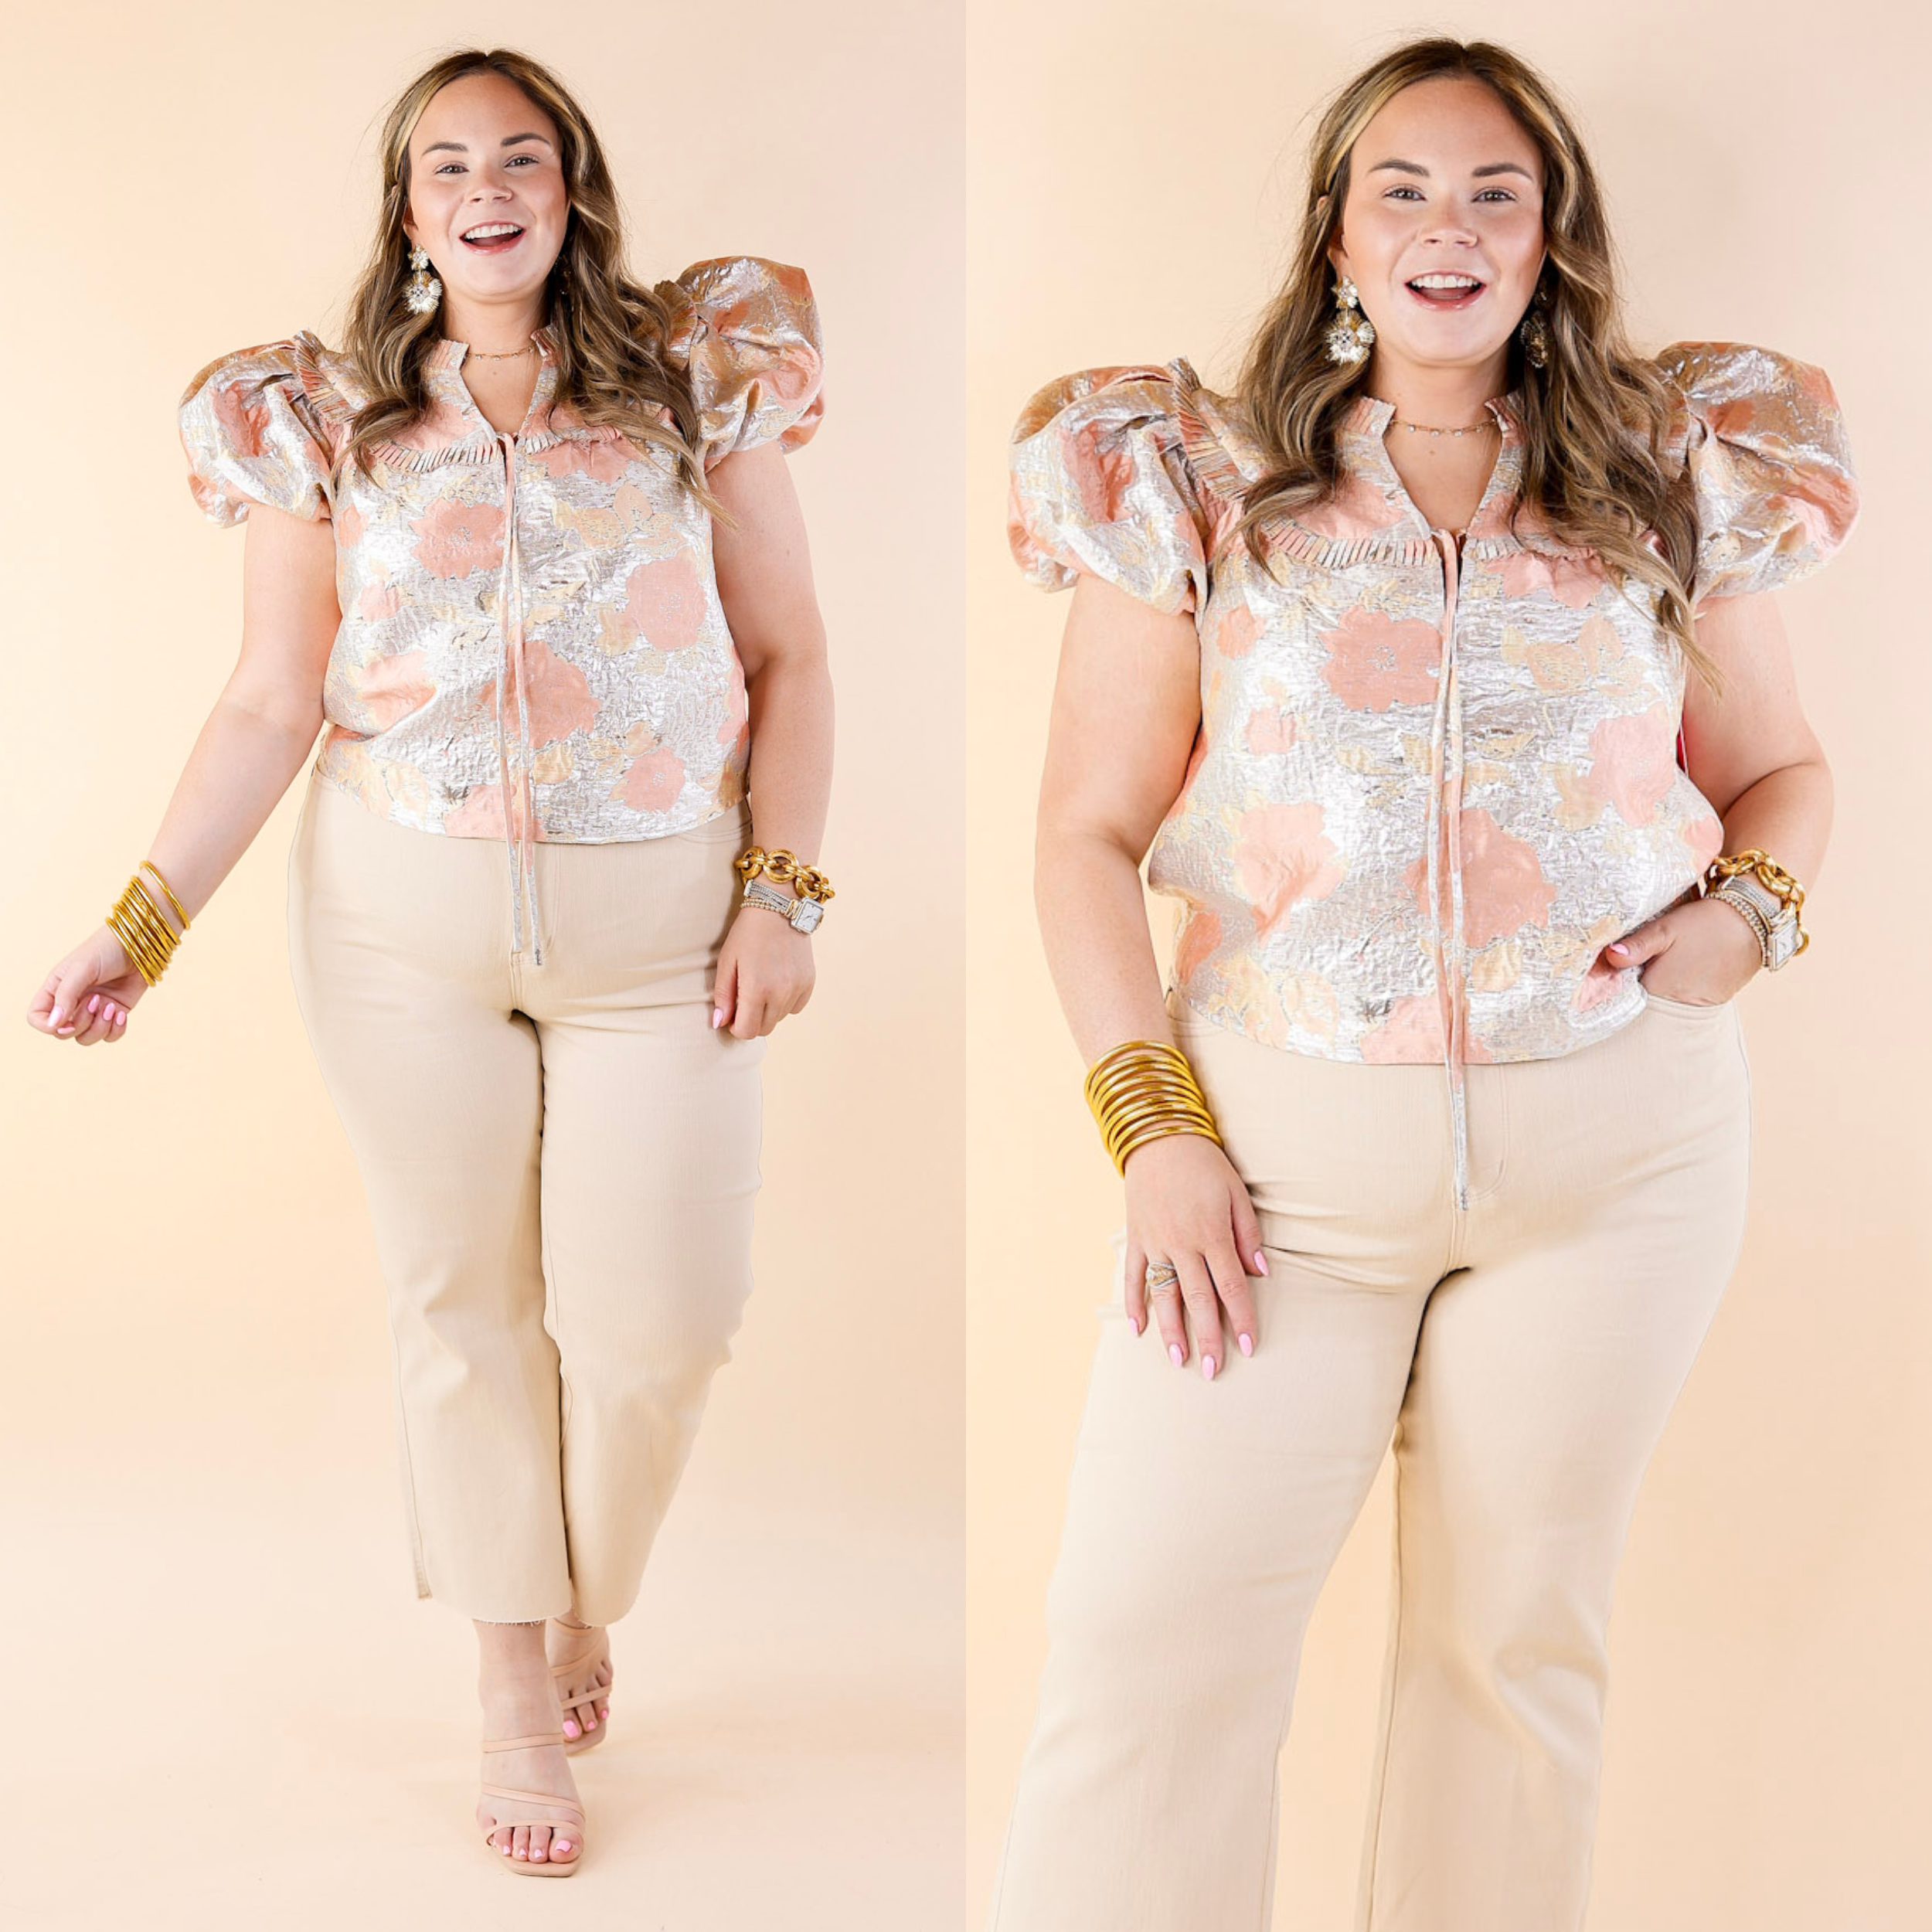 BuddyLove | Leeland Puff Sleeve Top in Sugar Cube (Silver and Peach) - Giddy Up Glamour Boutique